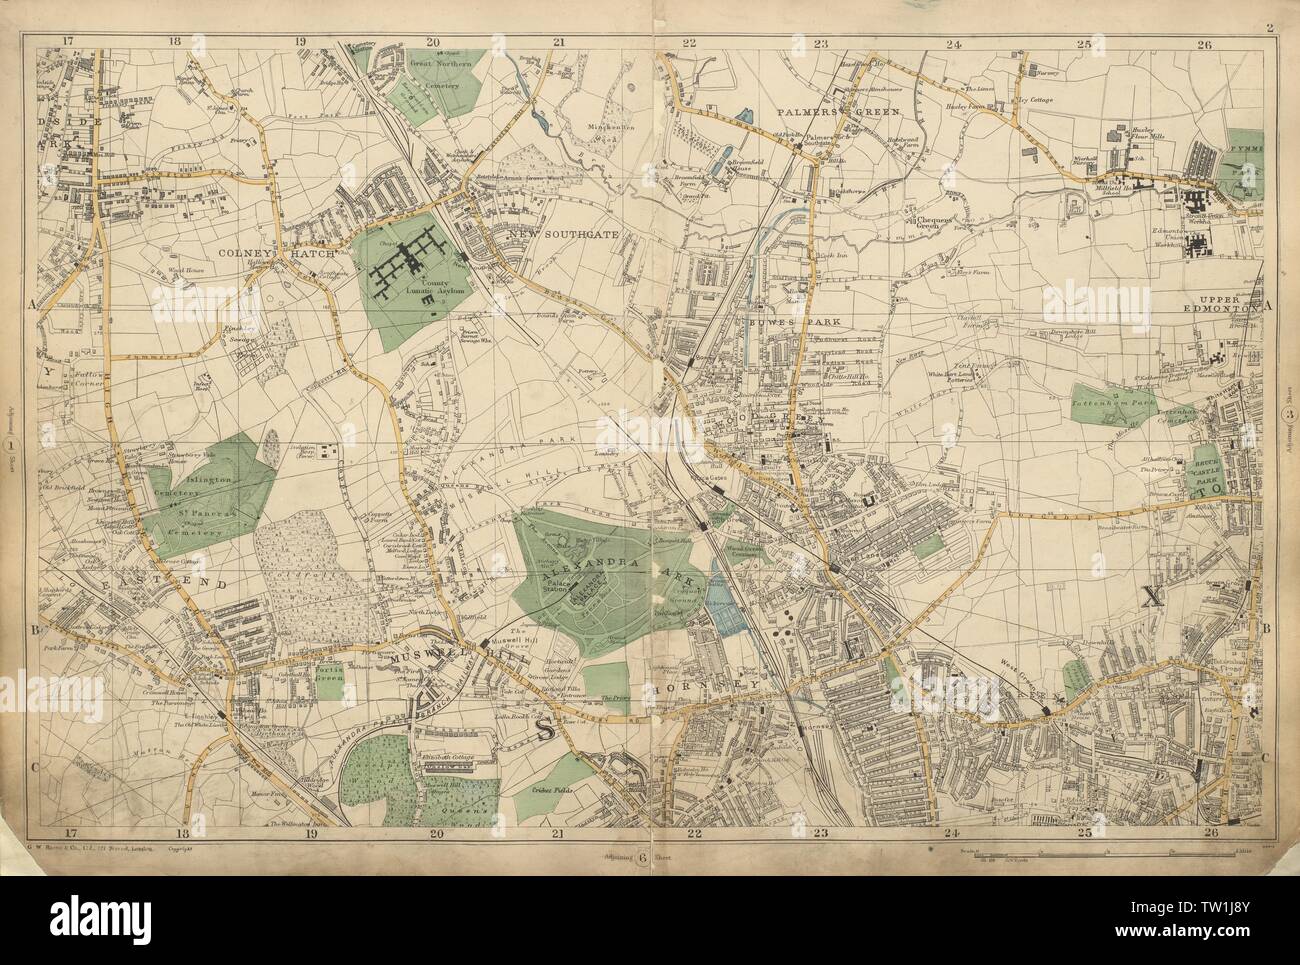 FRIERN BARNET/HORNSEY Palmers/Wood Green Muswell Hill Southgate BACON 1900 mappa Foto Stock